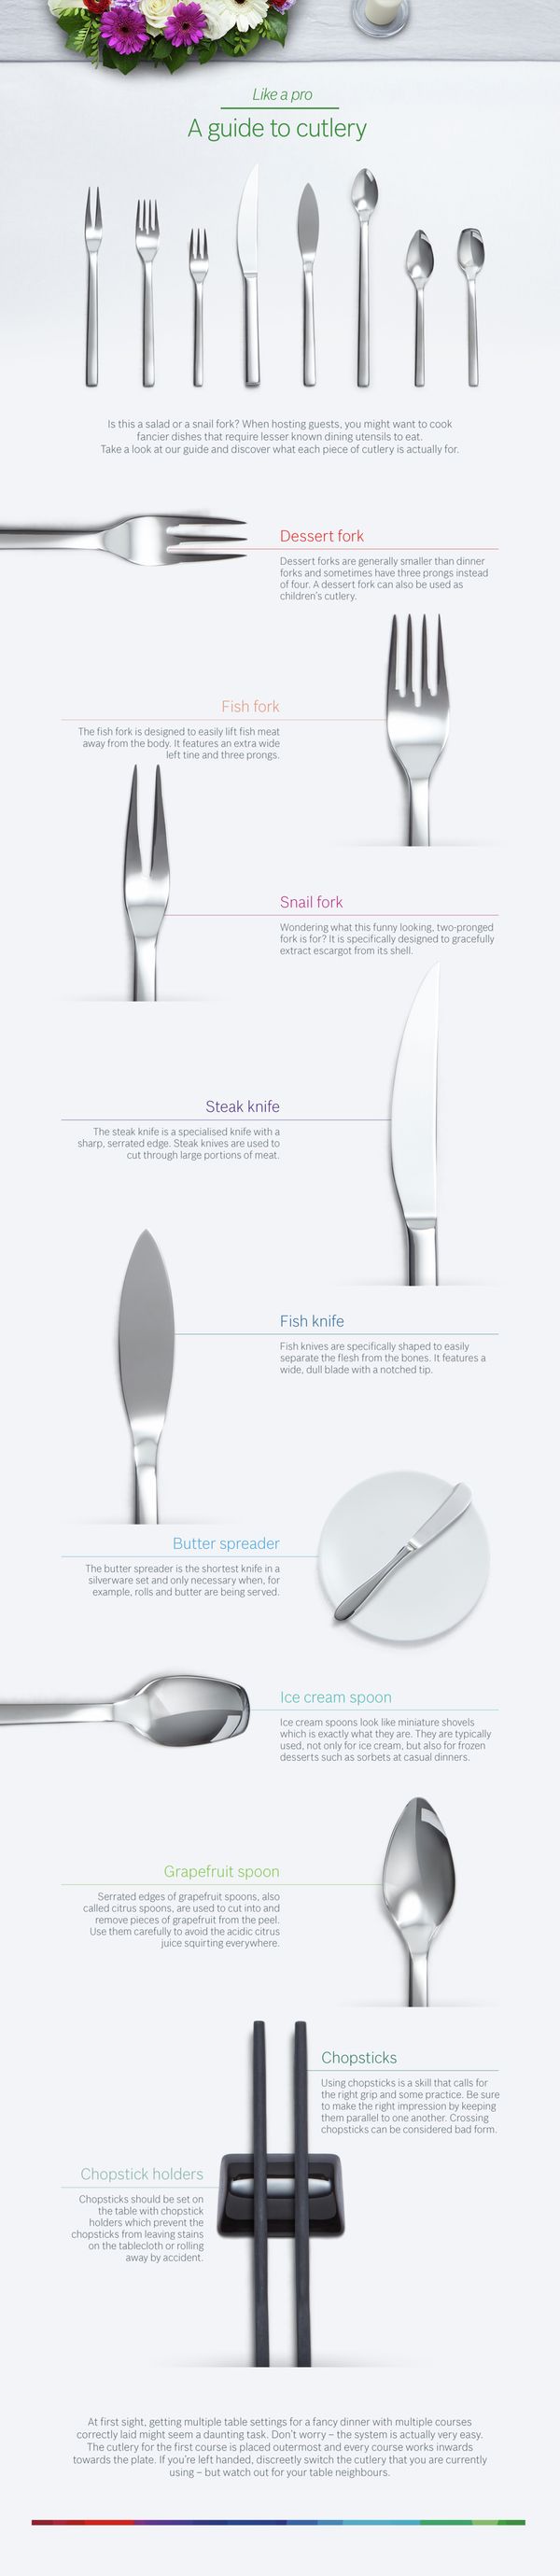 A guide to cutlery and utensils